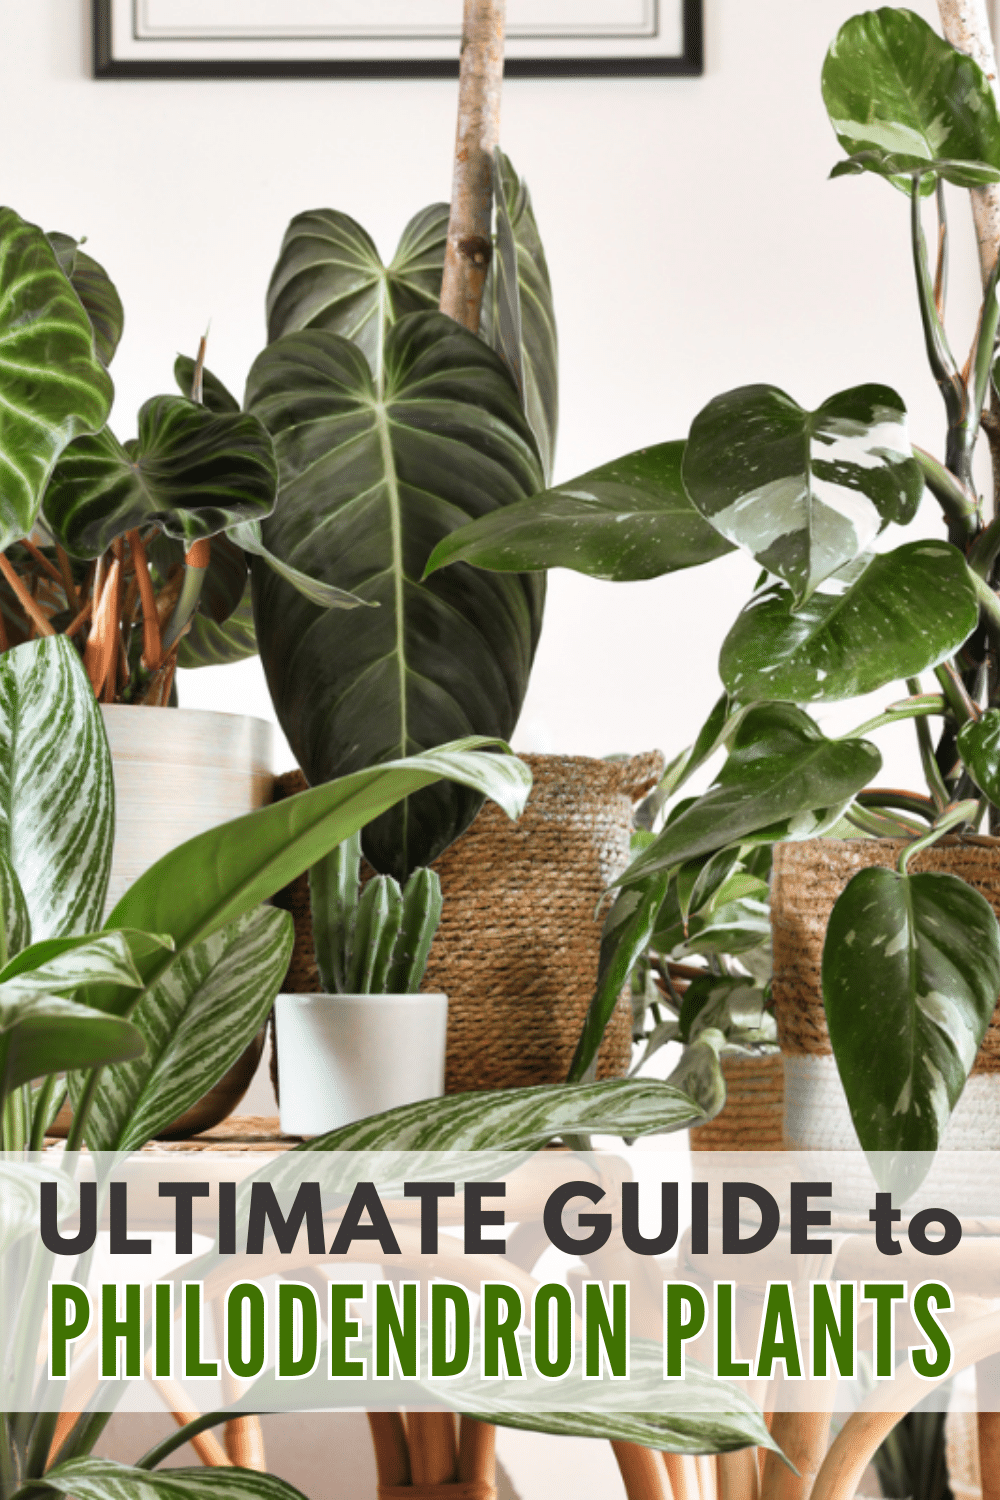 The ultimate guide to different types of philodendron in Philadelphia.